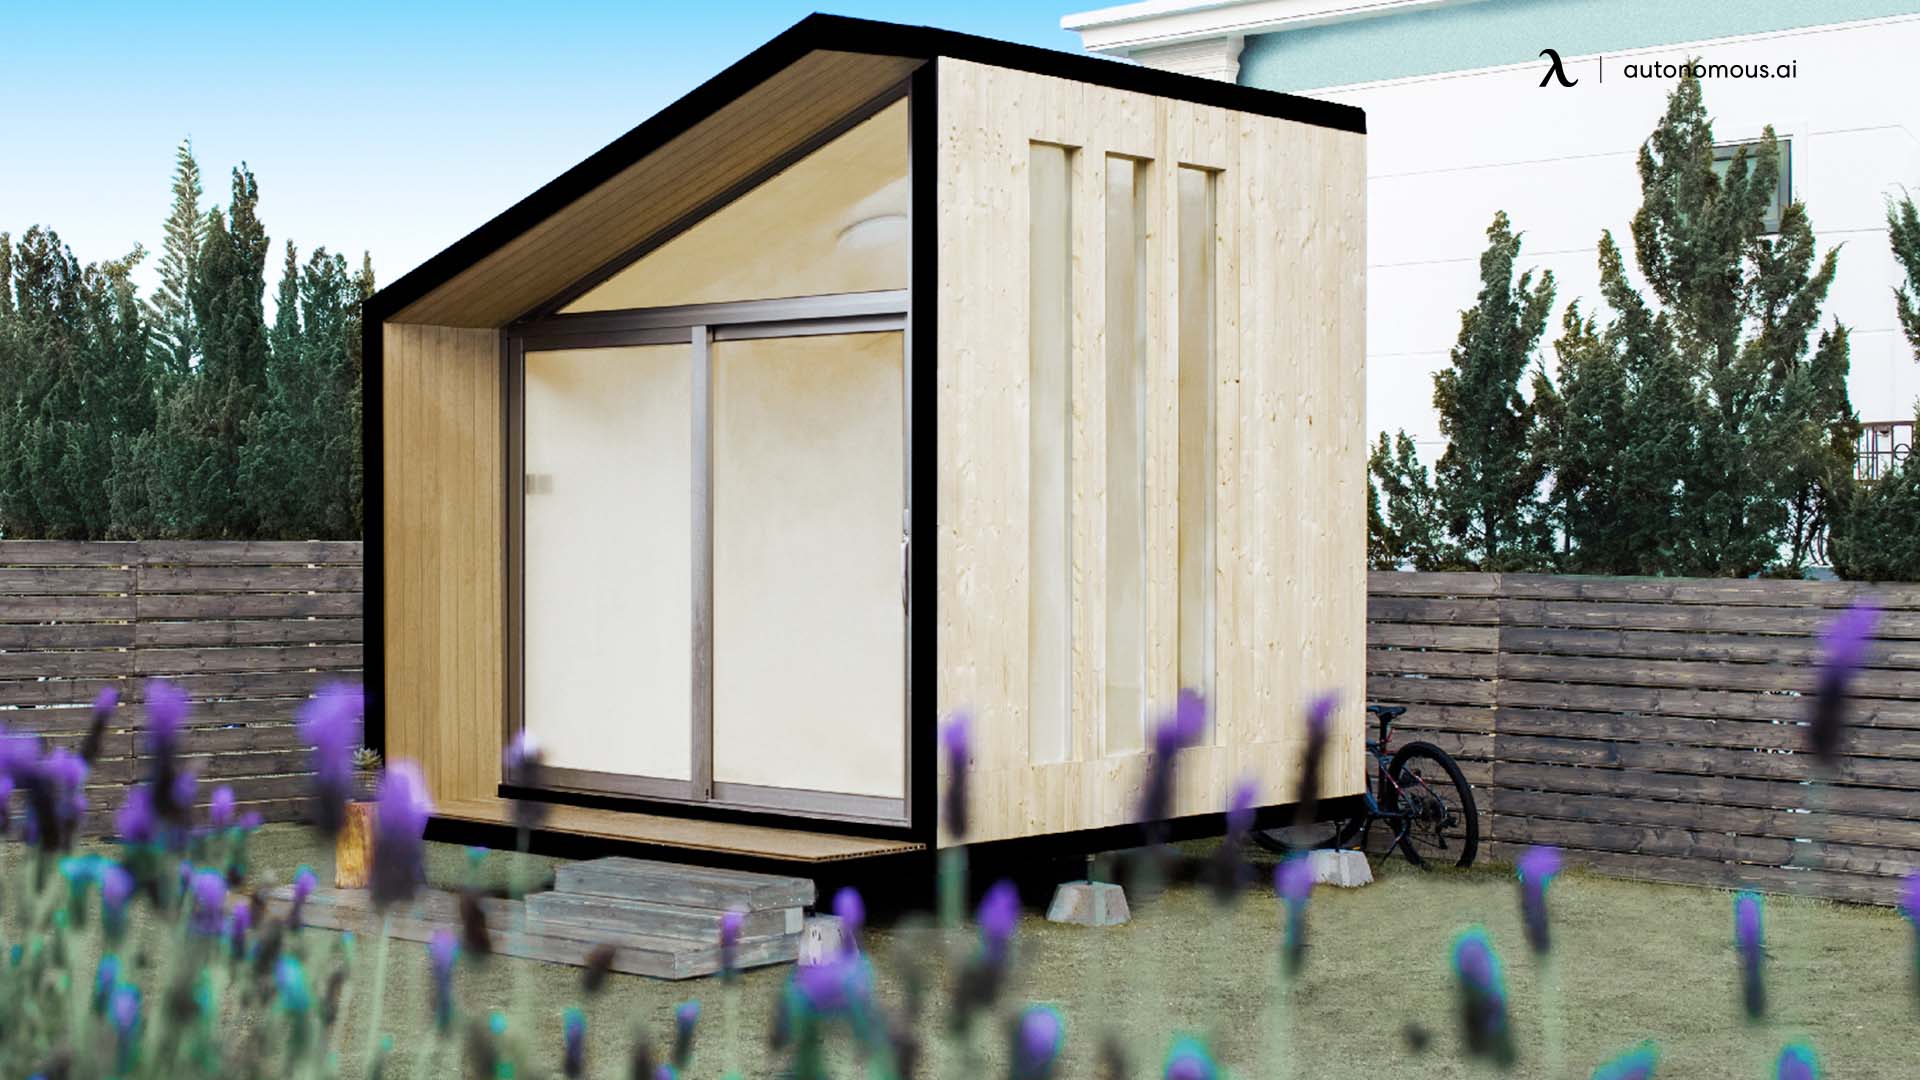 Assemble Walls for affordable garden office pod